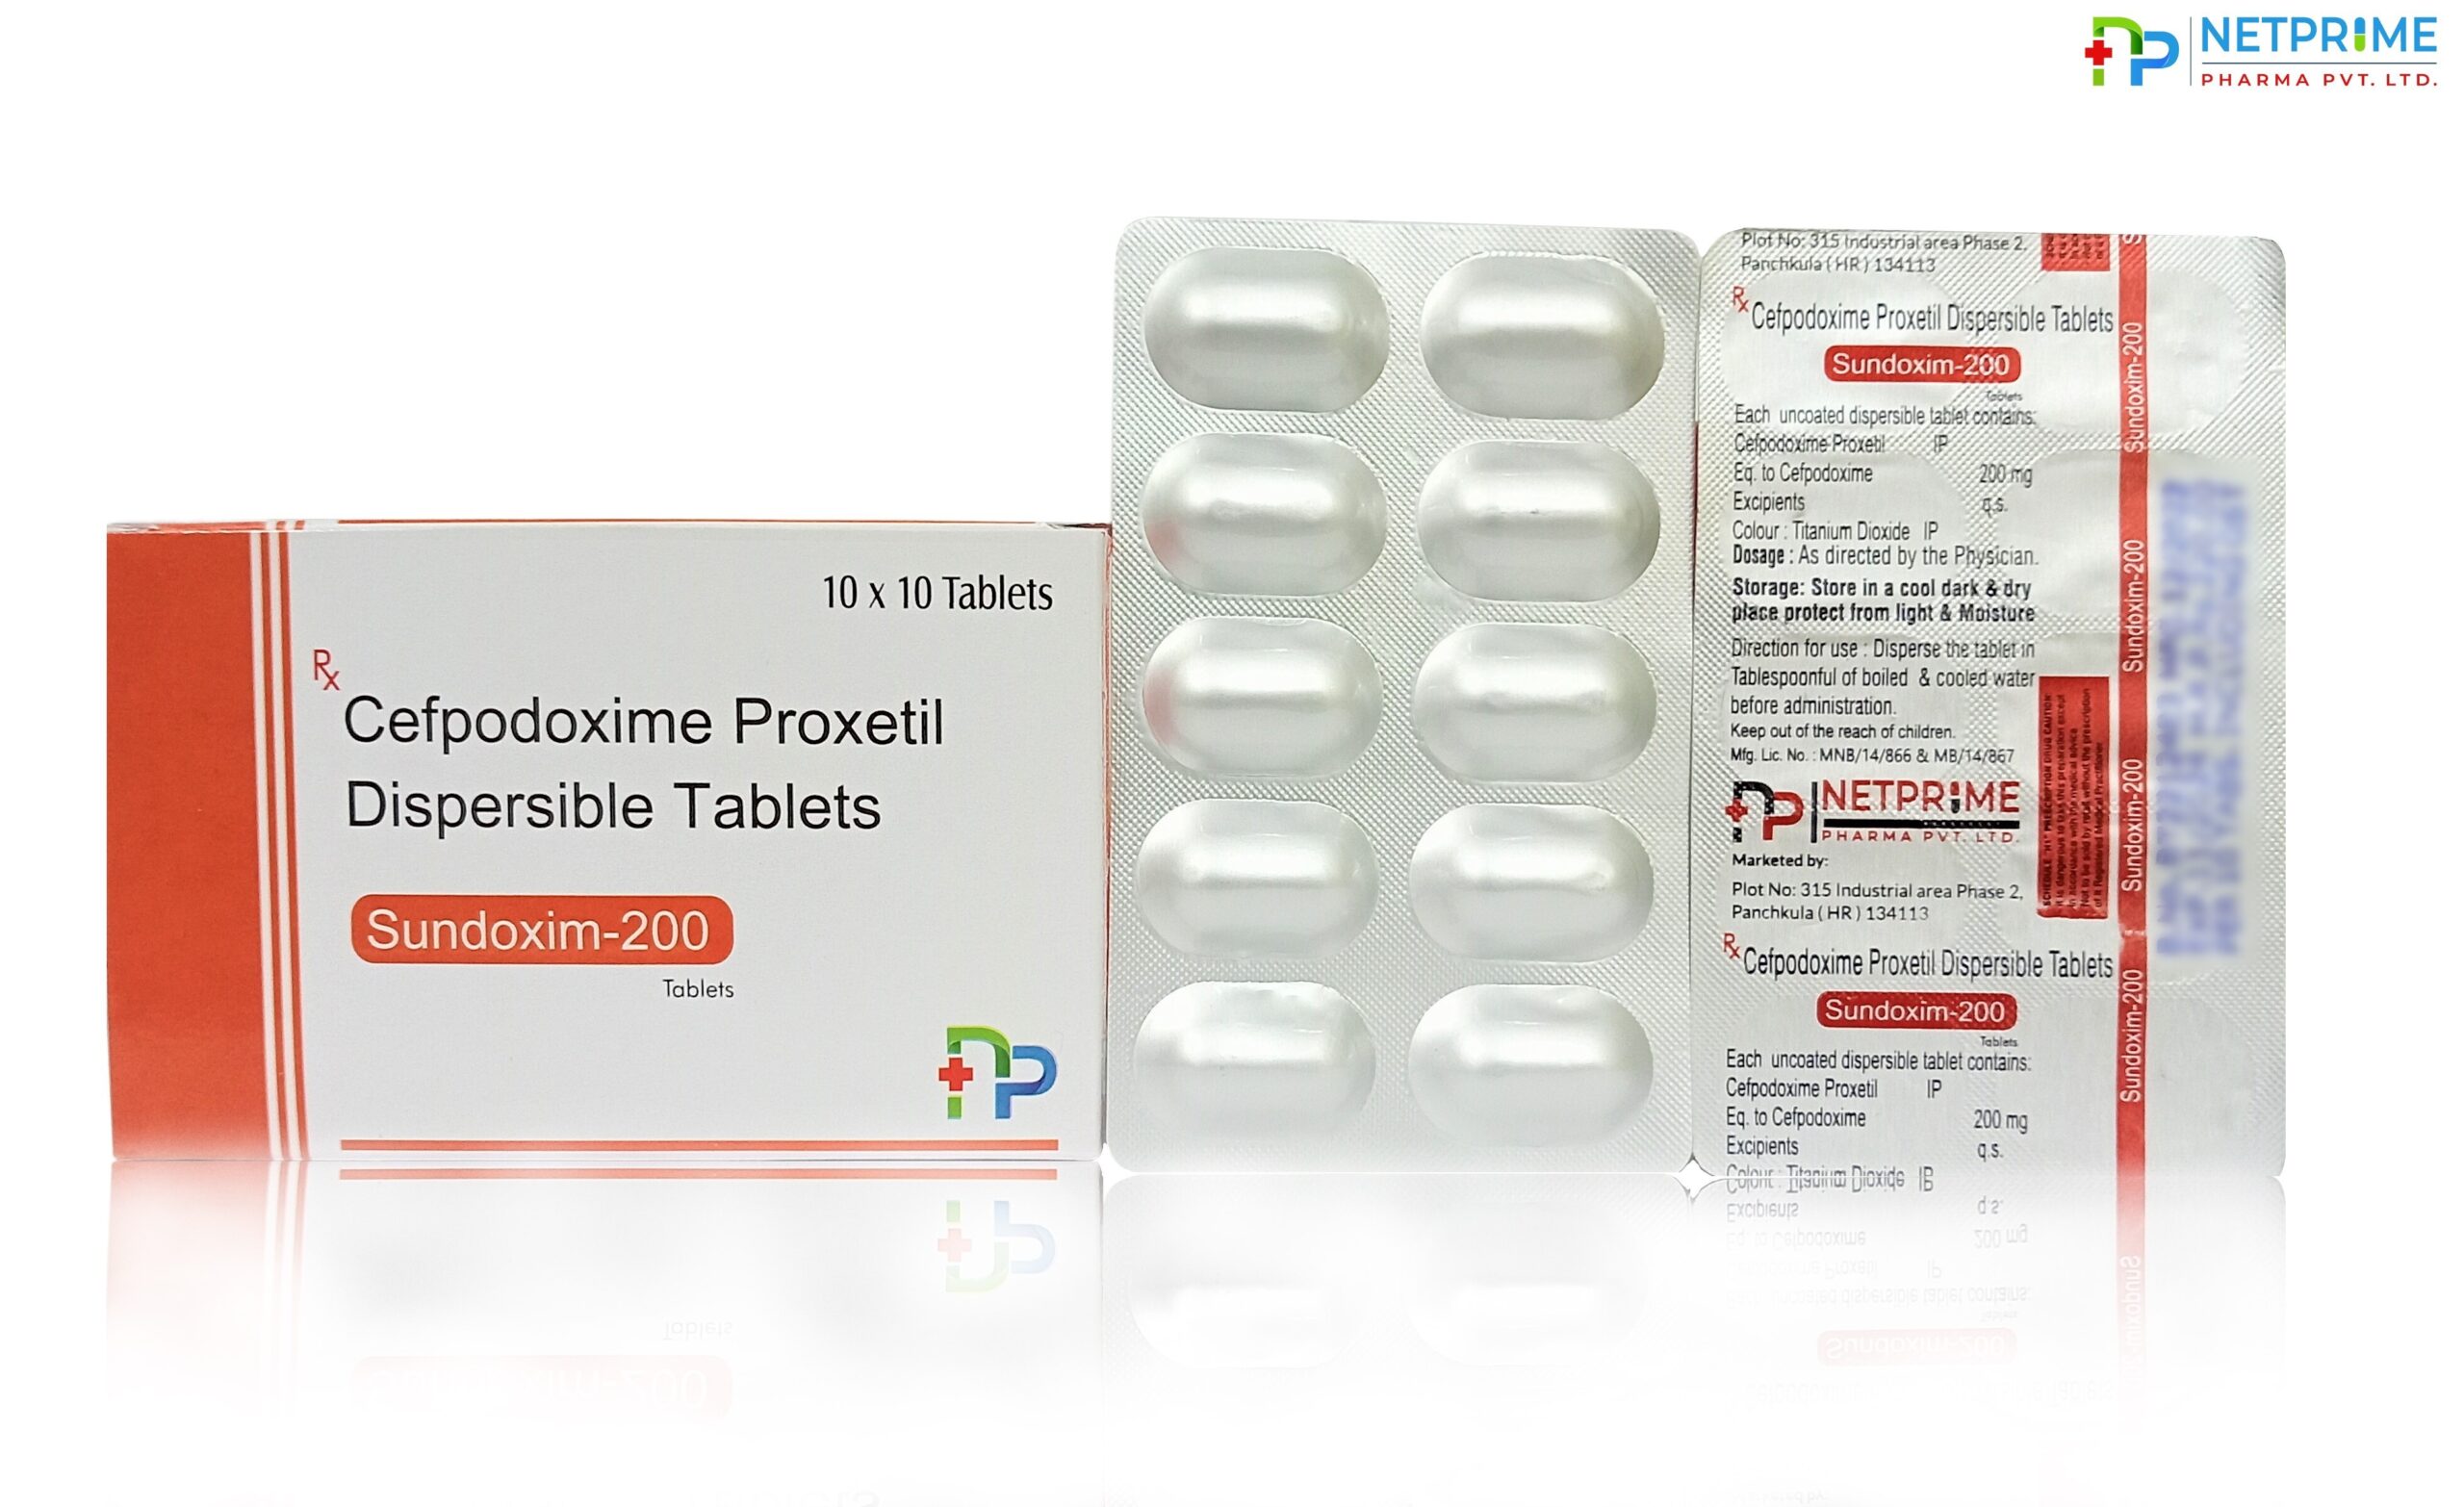 Cefpodoxime Proxetil Dispersible 200 mg Tablets